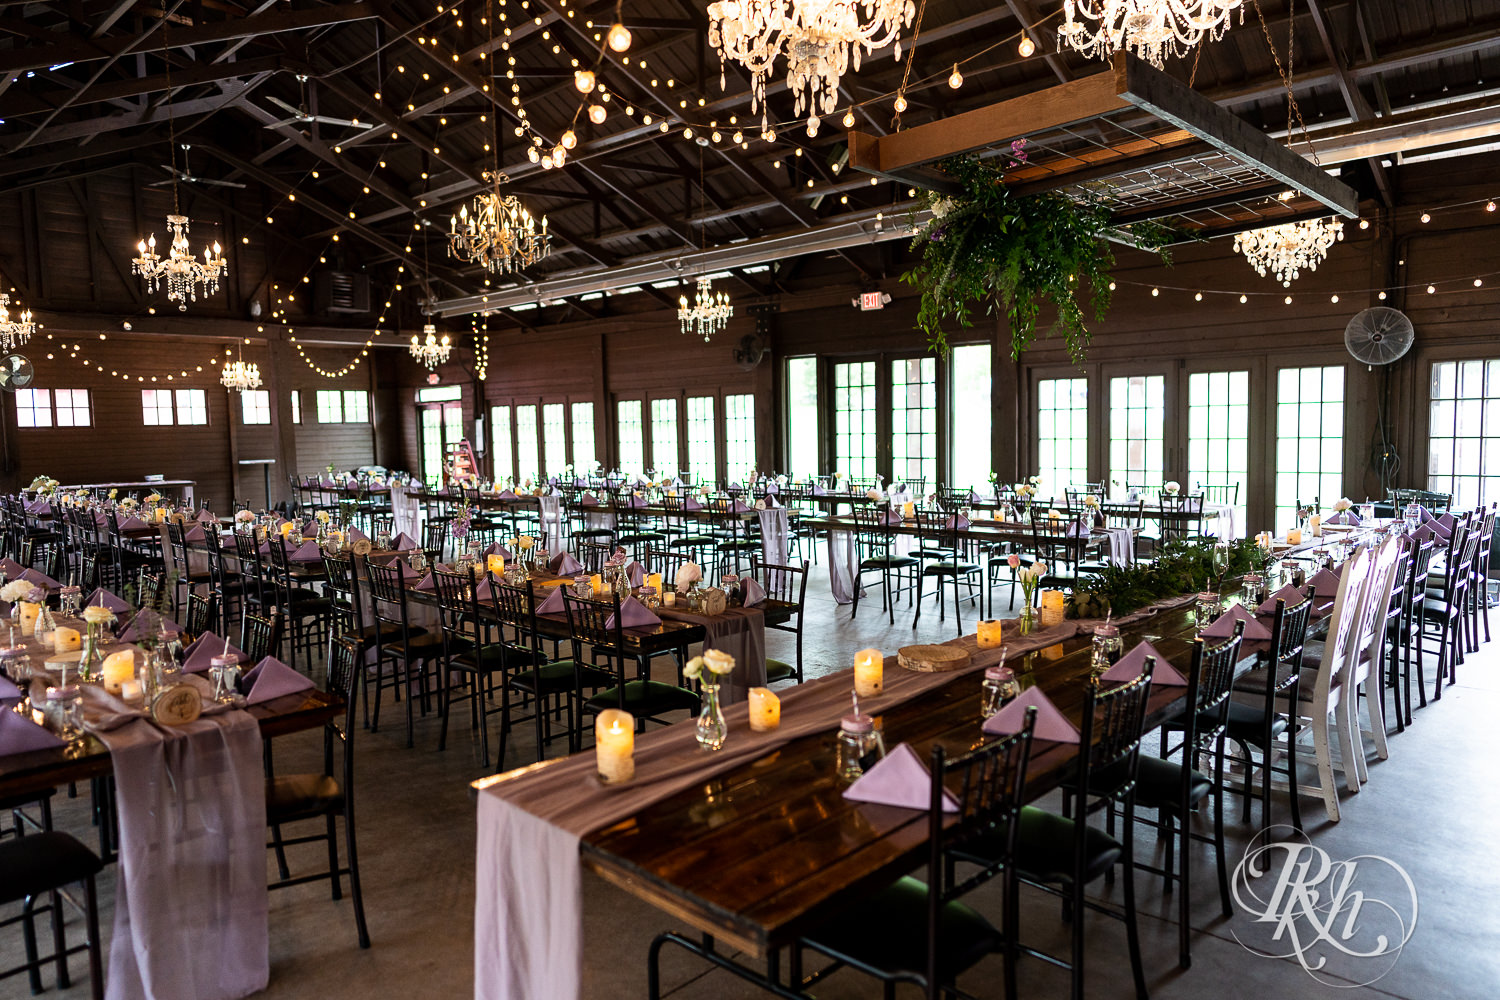 Indoor reception setup with purple accents at Hope Glen Farm in Cottage Grove, Minnesota.